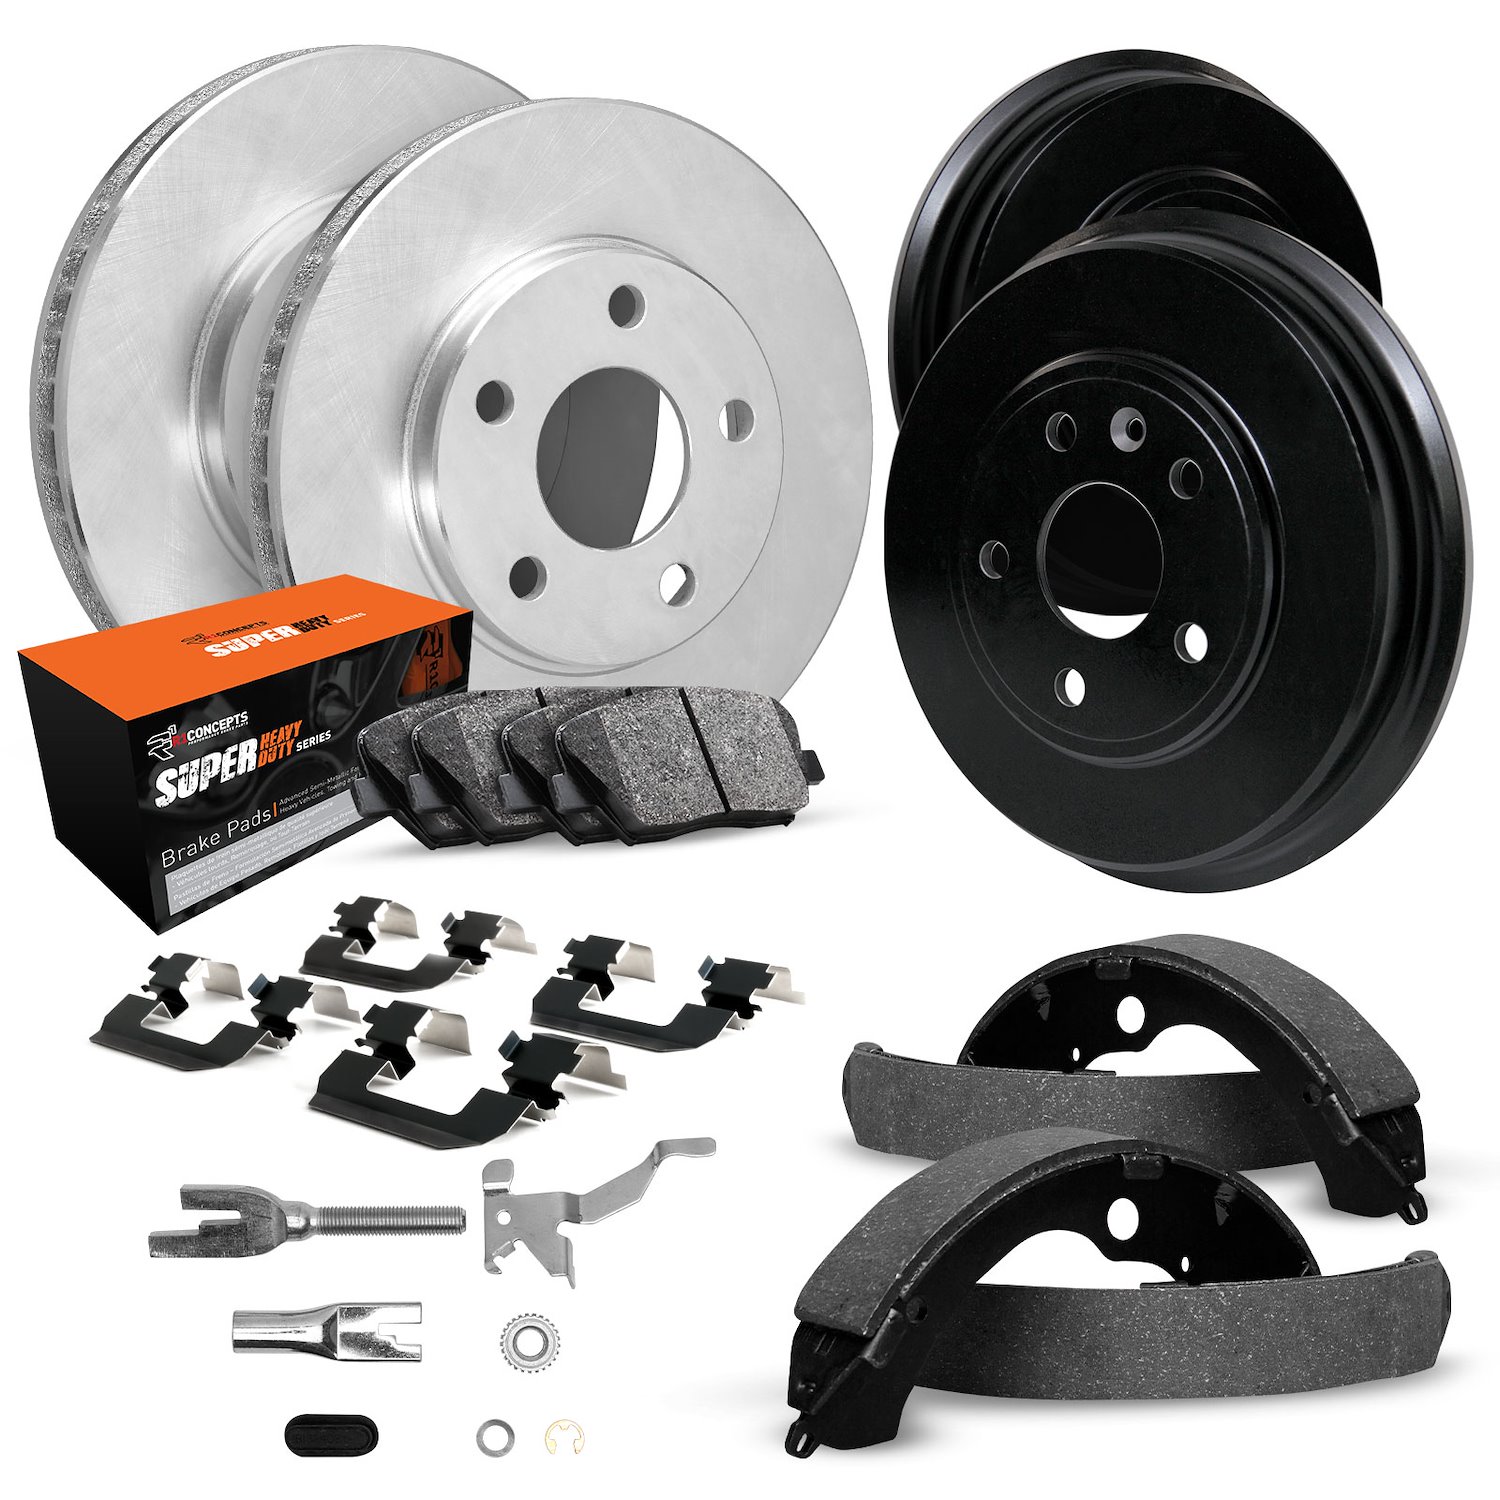 E-Line Blank Brake Rotor & Drum Set w/Super-Duty Pads, Shoes, Hardware, & Adjusters, 1972-1977 GM, Position: Front & Rear